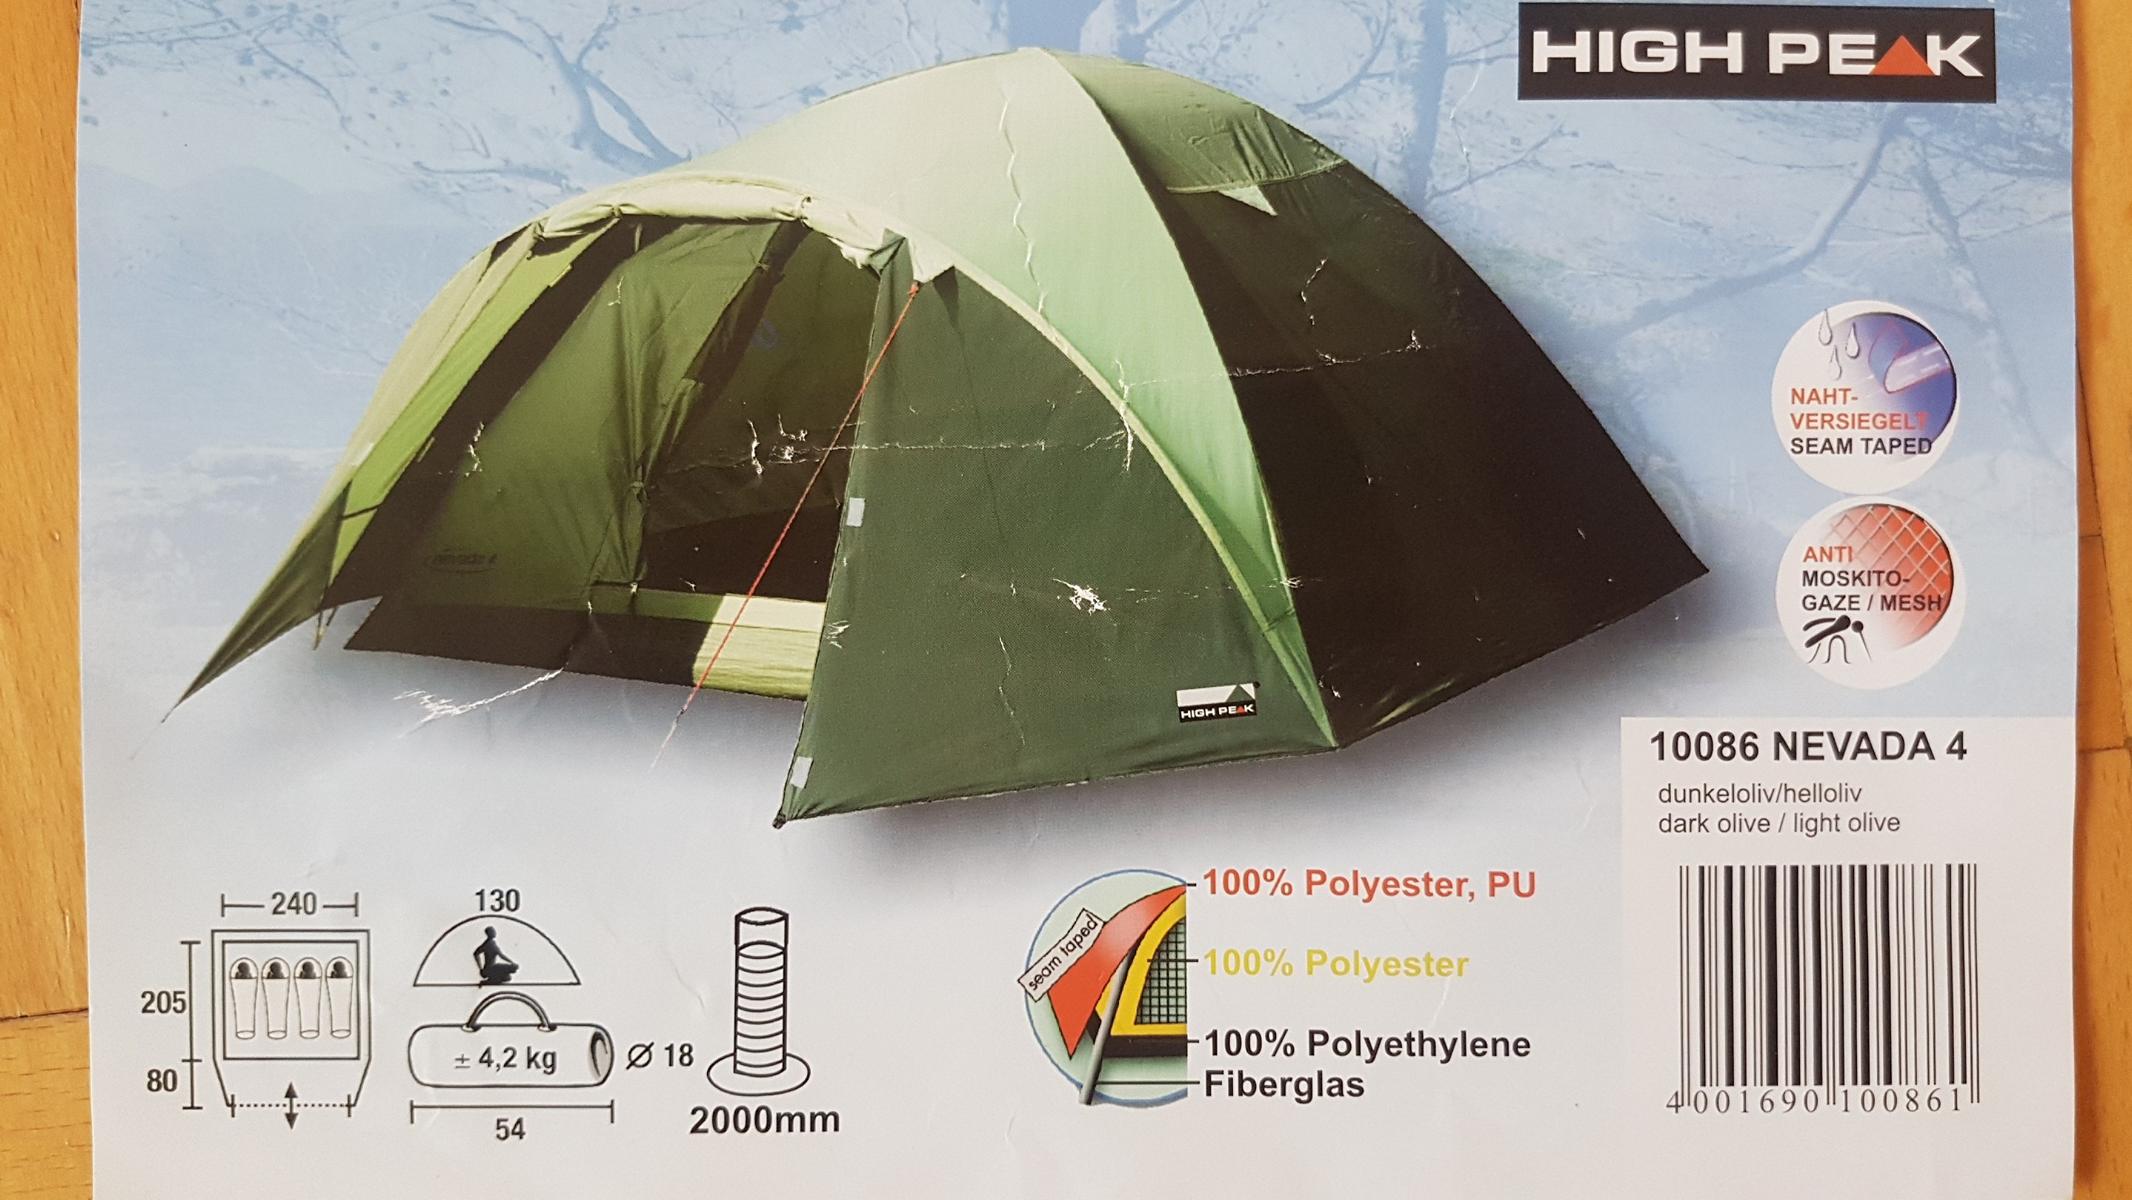 Information on the packaging of our Nevada 4 tent